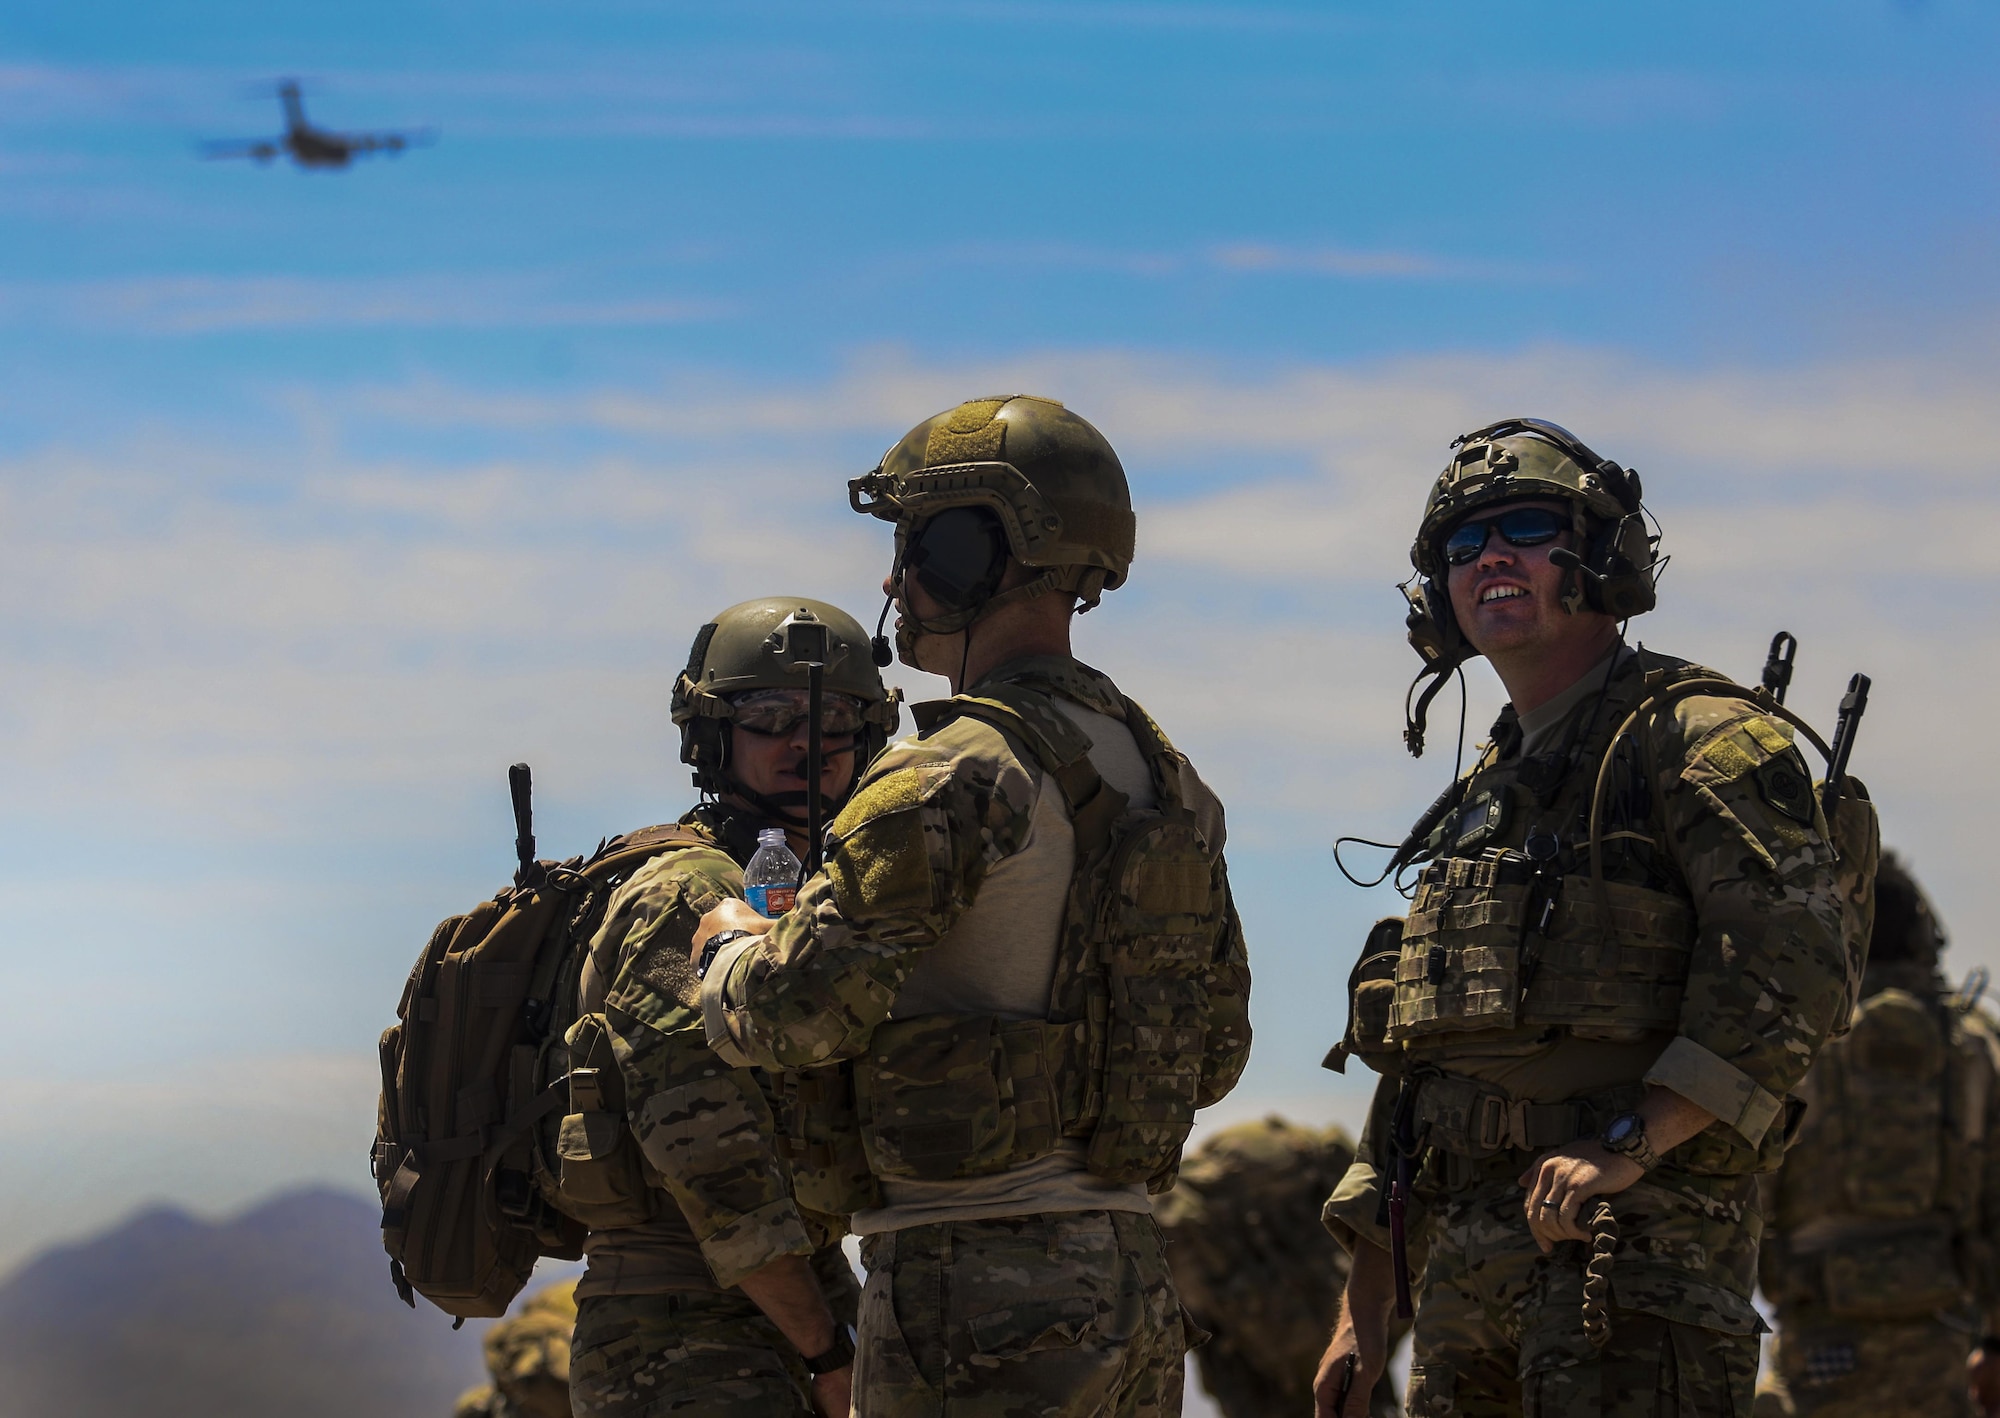 Multiple Joint Terminal Attack Controllers and Combat Controllers watch C-130s fly in formation during the Joint Forcible Entry Exercise portion of the United States Air Force Weapons School Advanced Integration, June 16, 2016. Joint service exercises like the JFEX are integral to maintaining operational cohesiveness between the Air Force and the Army. (U.S. Air Force photo by Airman 1st Class Kevin Tanenbaum)